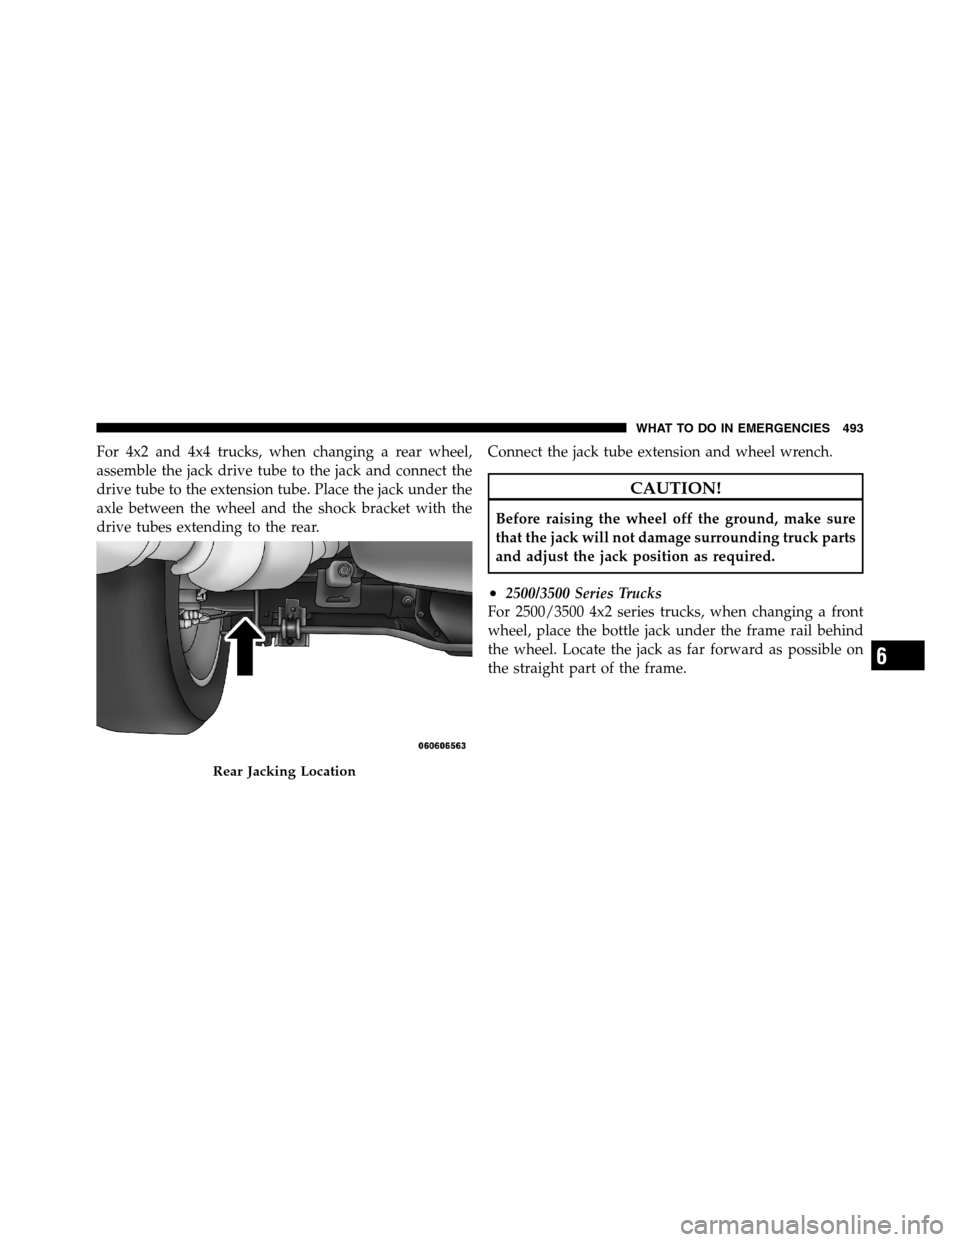 Ram 3500 2011  Owners Manual For 4x2 and 4x4 trucks, when changing a rear wheel,
assemble the jack drive tube to the jack and connect the
drive tube to the extension tube. Place the jack under the
axle between the wheel and the s